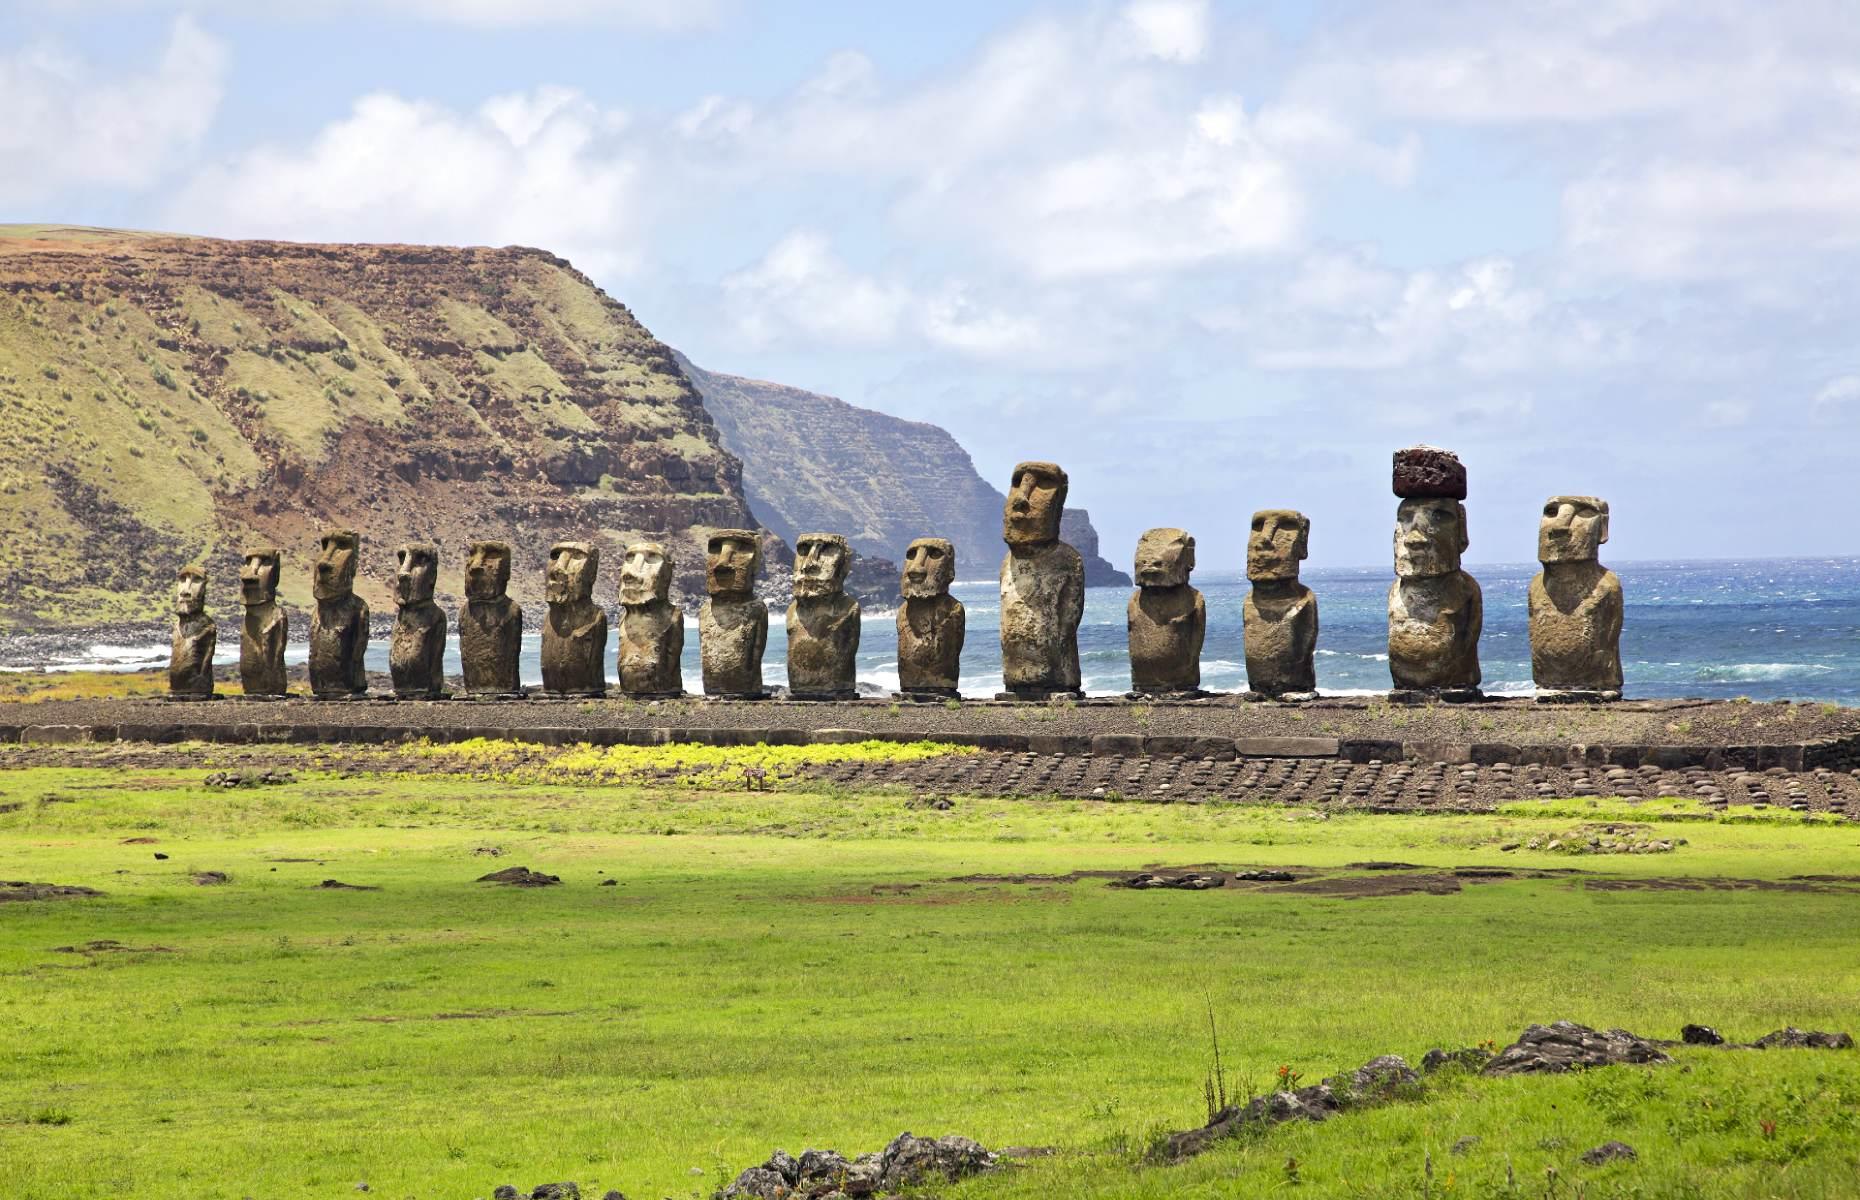 <p>Among the strangest feats of ancient engineering are the Moai statues on Easter Island. It apparently took one year to create each of these 800-plus monolithic statues, using basic stone picks called toki. It’s unclear how they were moved into position – some believe they were rolled up on logs, while others say they were transported upright using ropes. Recent excavations have also shown that the heads are only part of the giant statues: their bodies are buried underground. Given the island’s remote location, getting here isn’t easy, but some people stop over while visiting Australasia or South America. It’s also possible to book a full-day guided tour. </p>